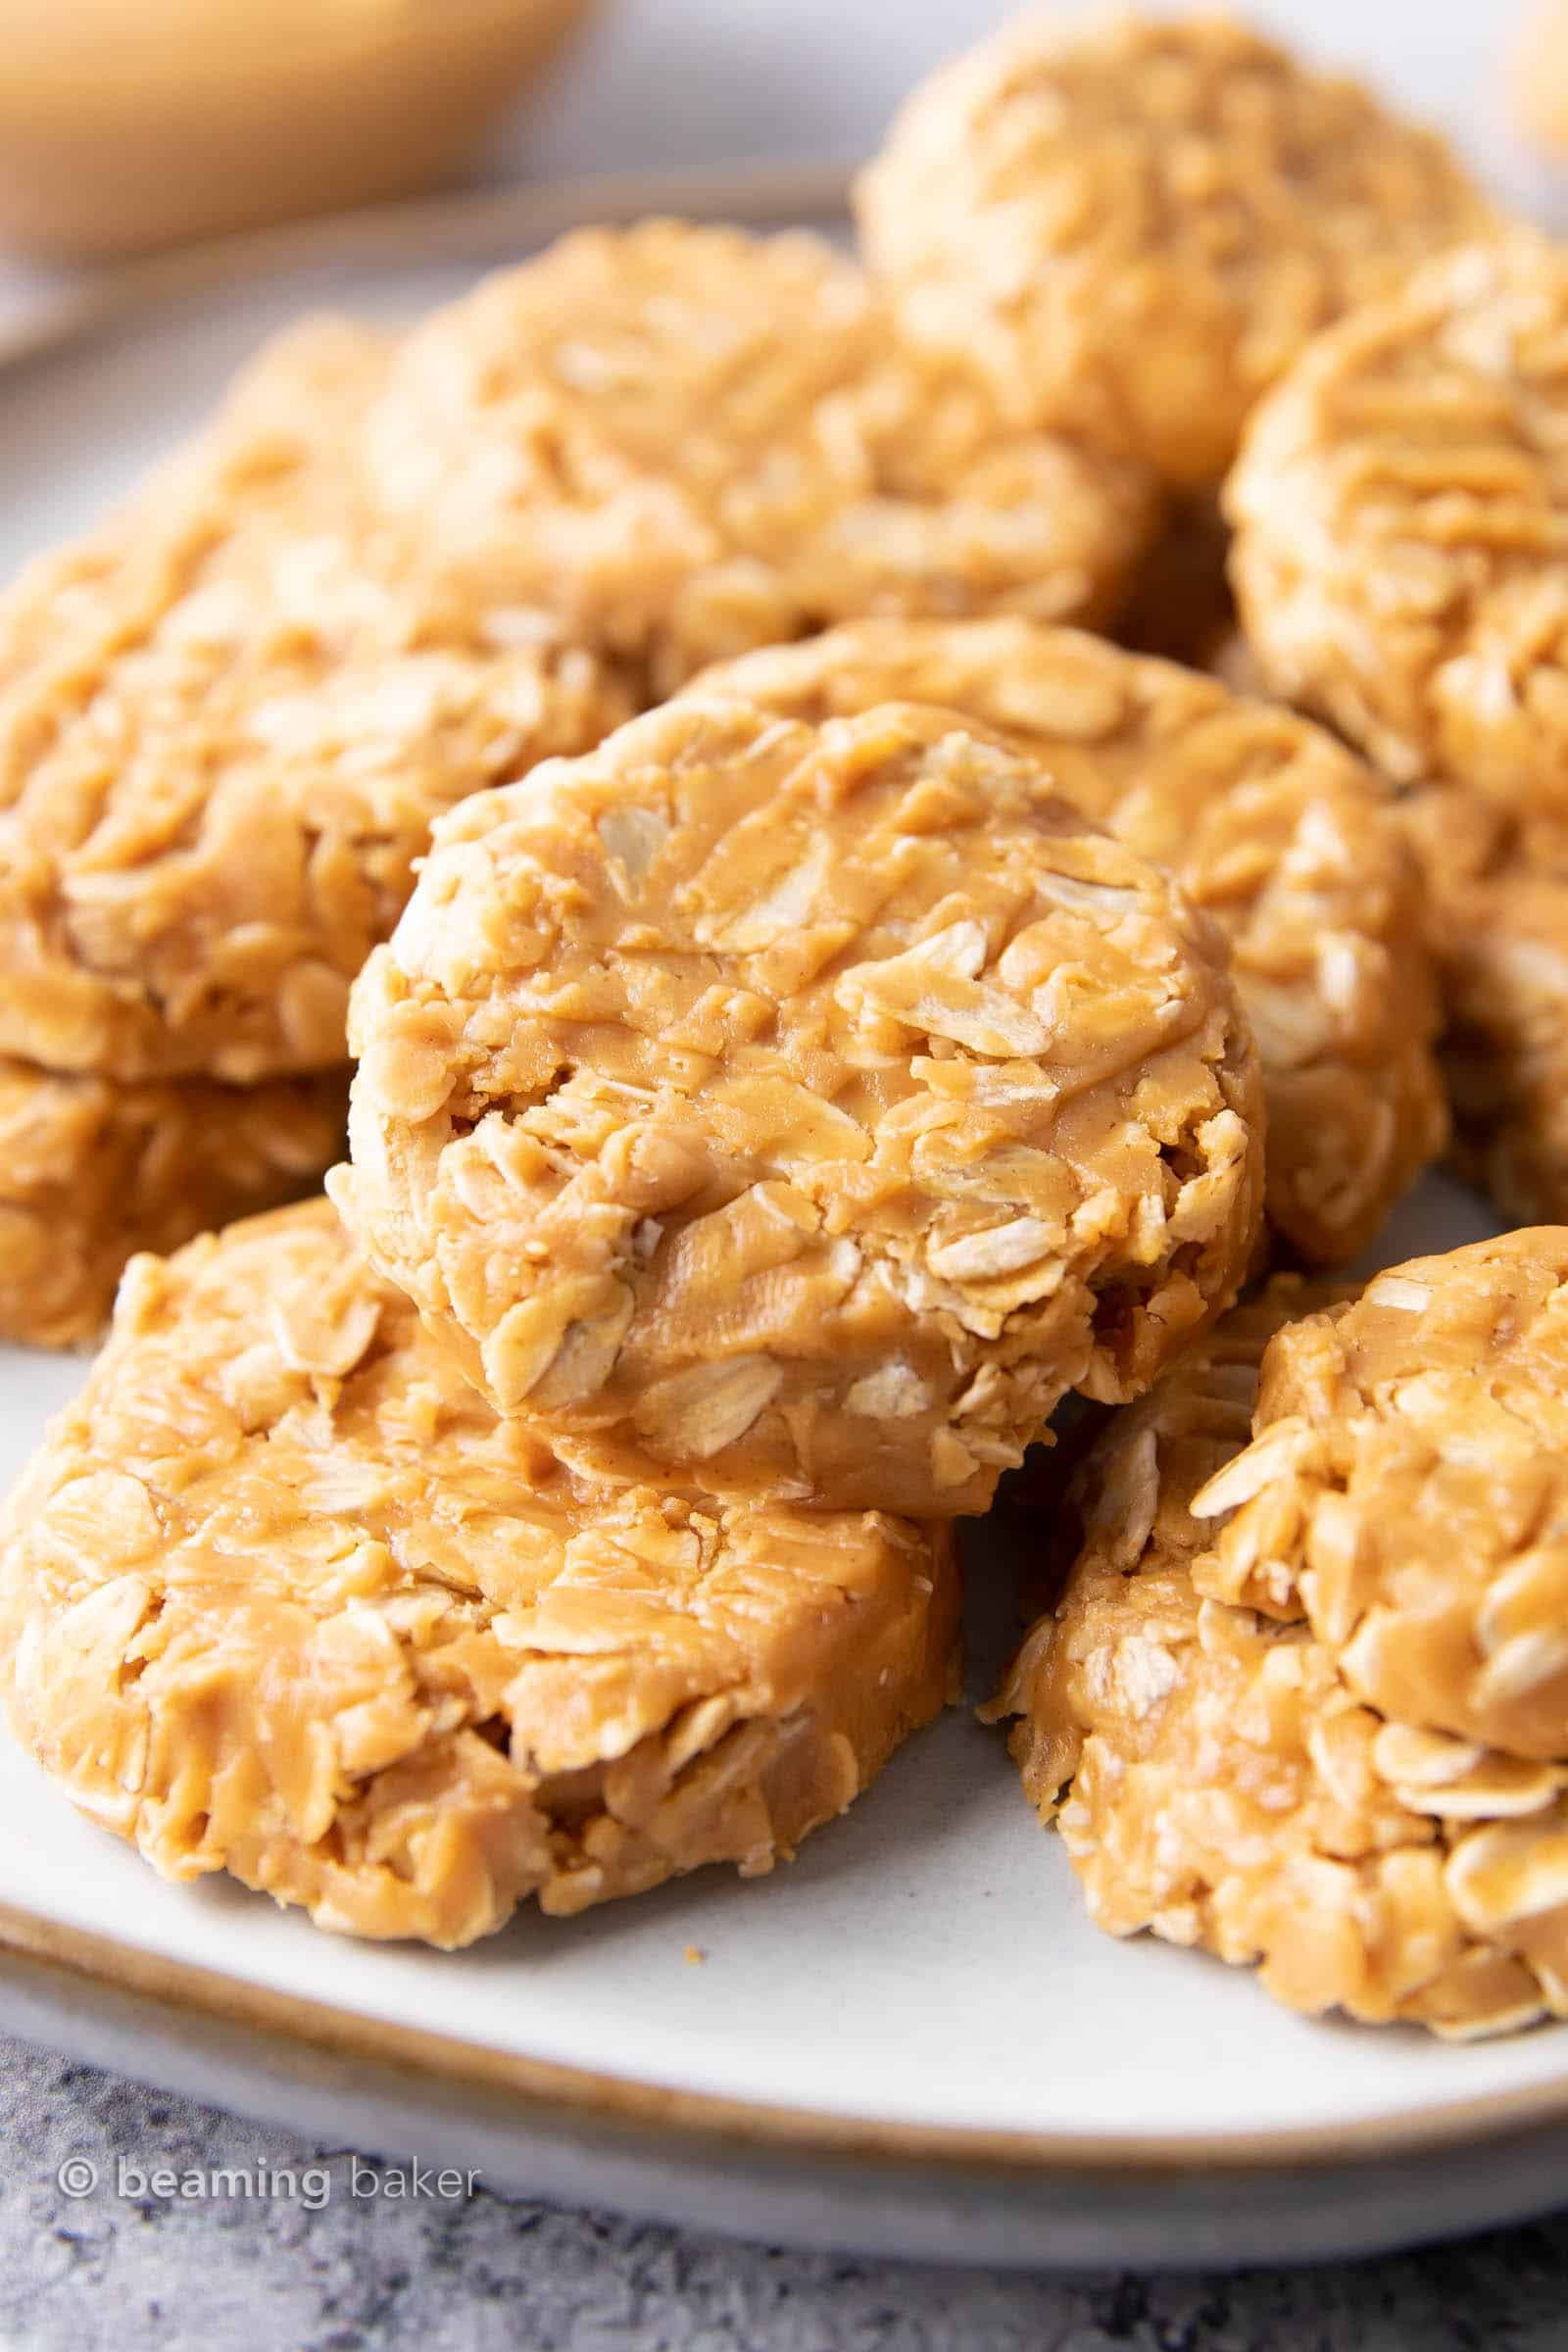 The Best 15 Easy Peanut butter No Bake Cookies – How to Make Perfect ...